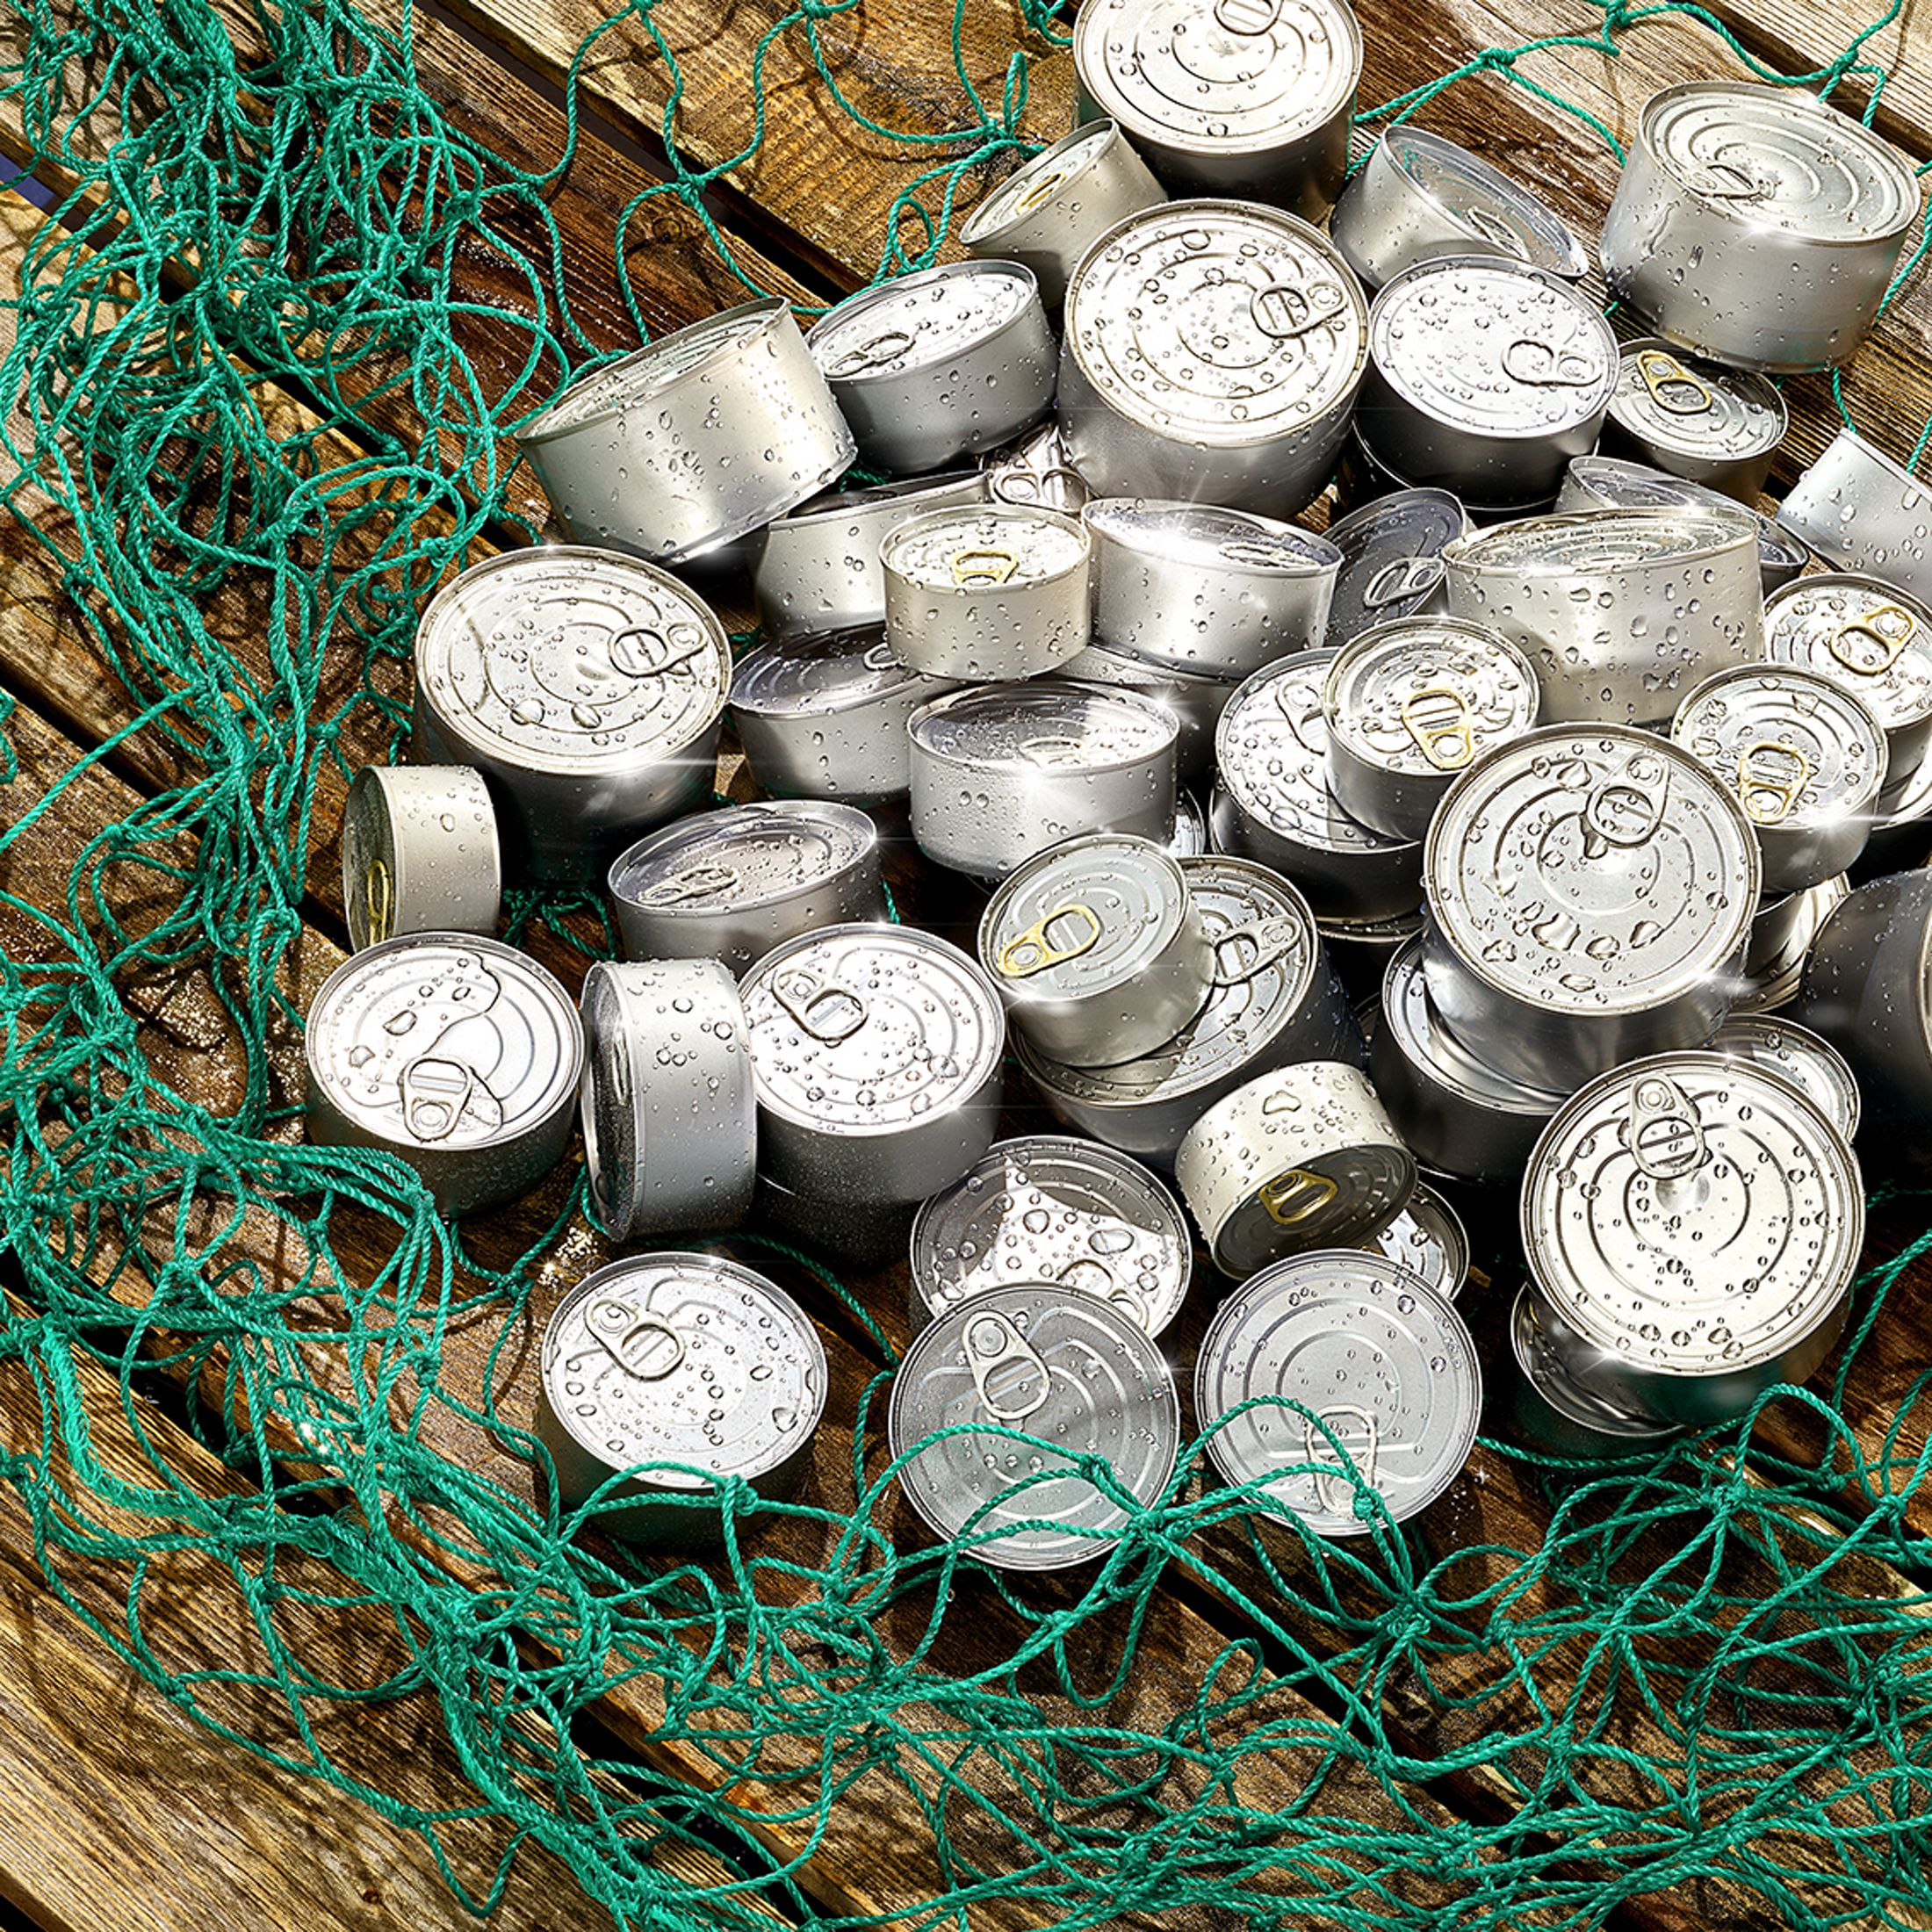 Tuna cans are "caught" in a green net.